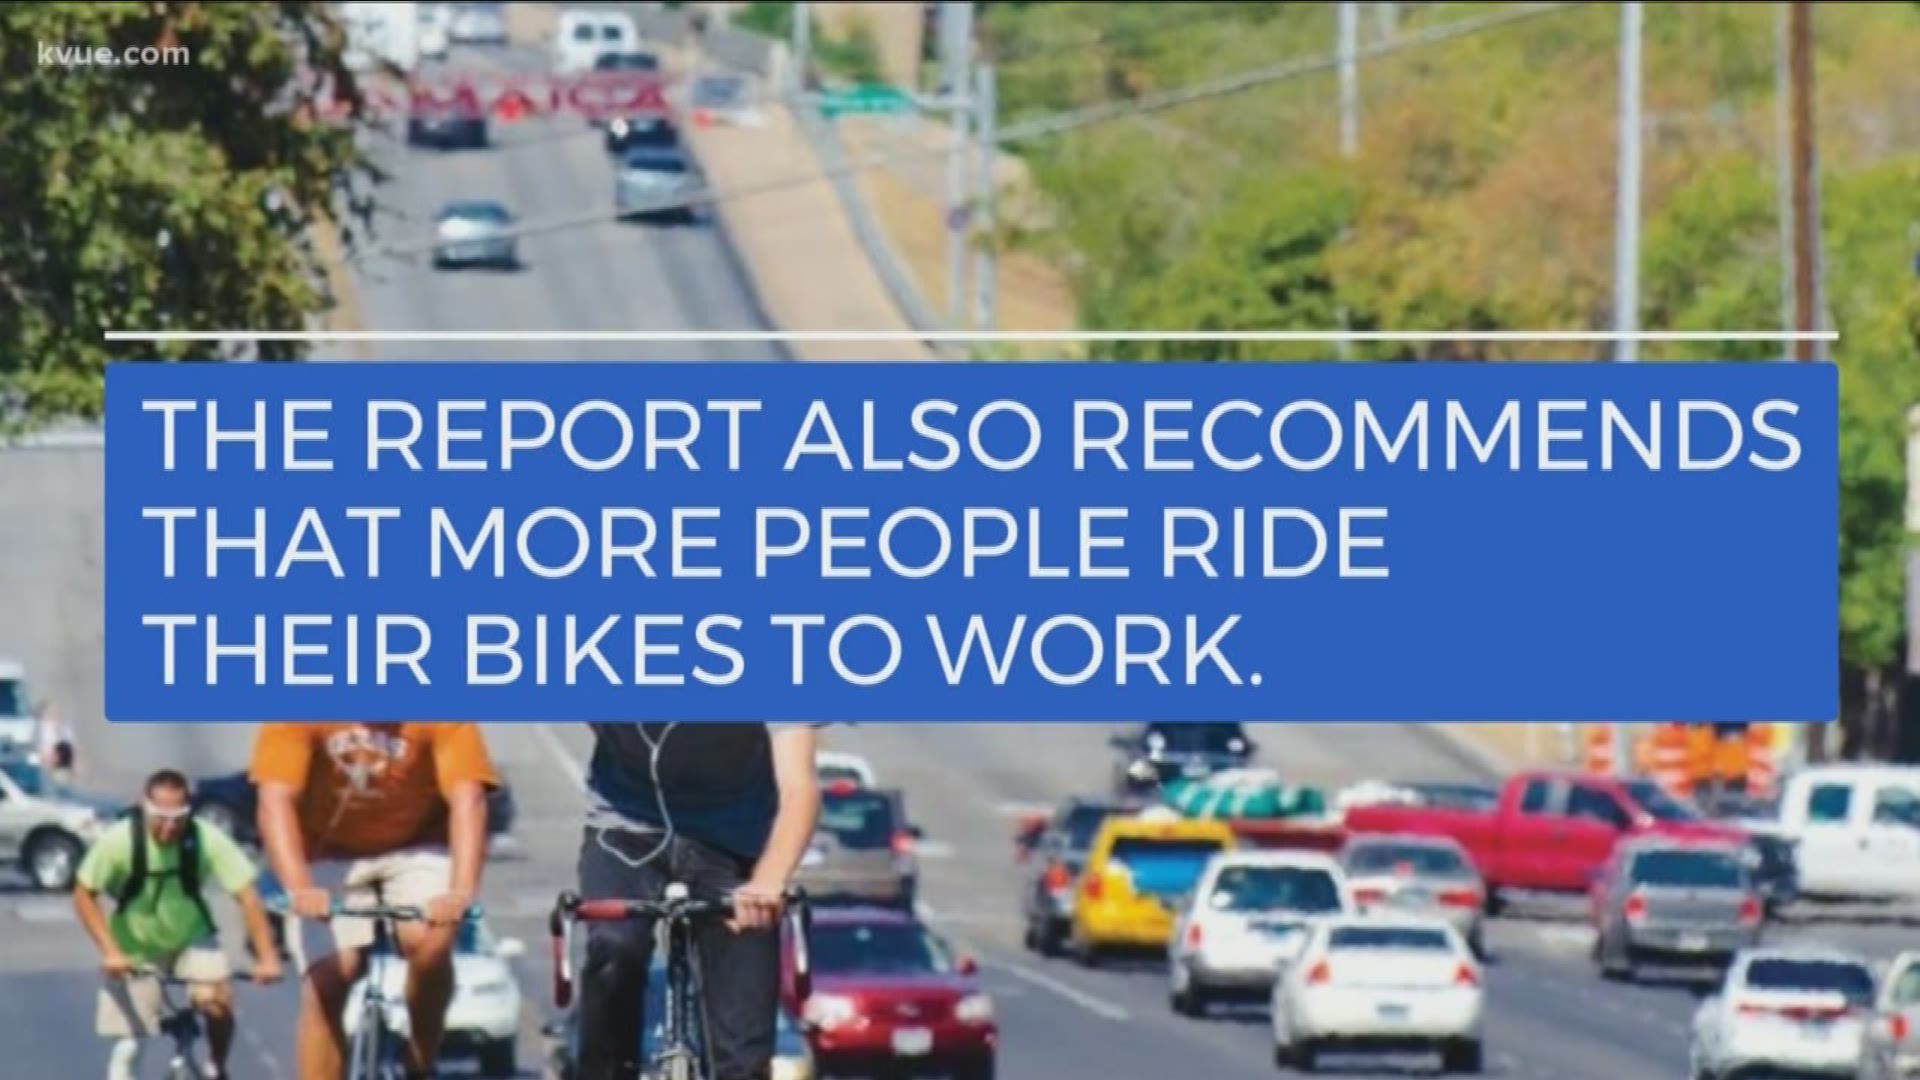 Are you willing to ditch your car and ride your bike to work? That's one of the possibilities promoted by the new Austin mobility plan that was made public Friday.